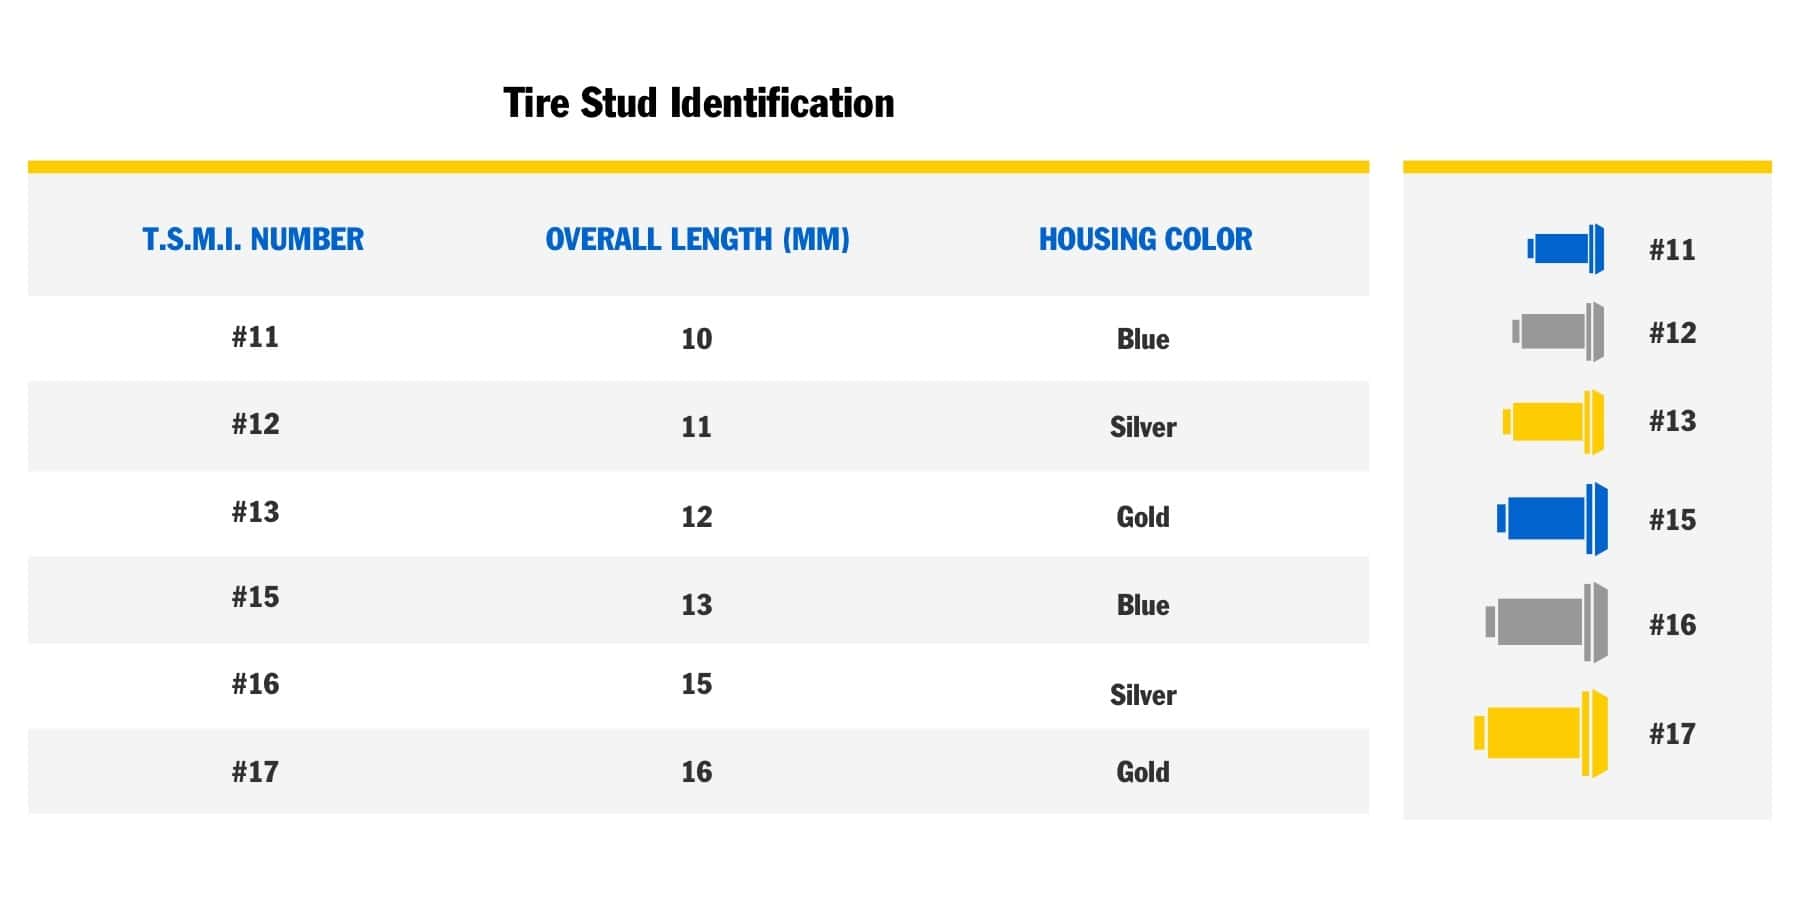 Graphic chart comparing the overall length and housing colors of all six types of tire studs, from number eleven up to number seventeen. Stud 11 is 10 millimeters long and blue Stud 12 is 11 millimeters long and silver Stud 13 is 12 millimeters long and gold Stud 15 is 13 millimeters long and blue Stud 16 is 15 millimeters long and silver Stud 17 is 16 millimeters long and gold